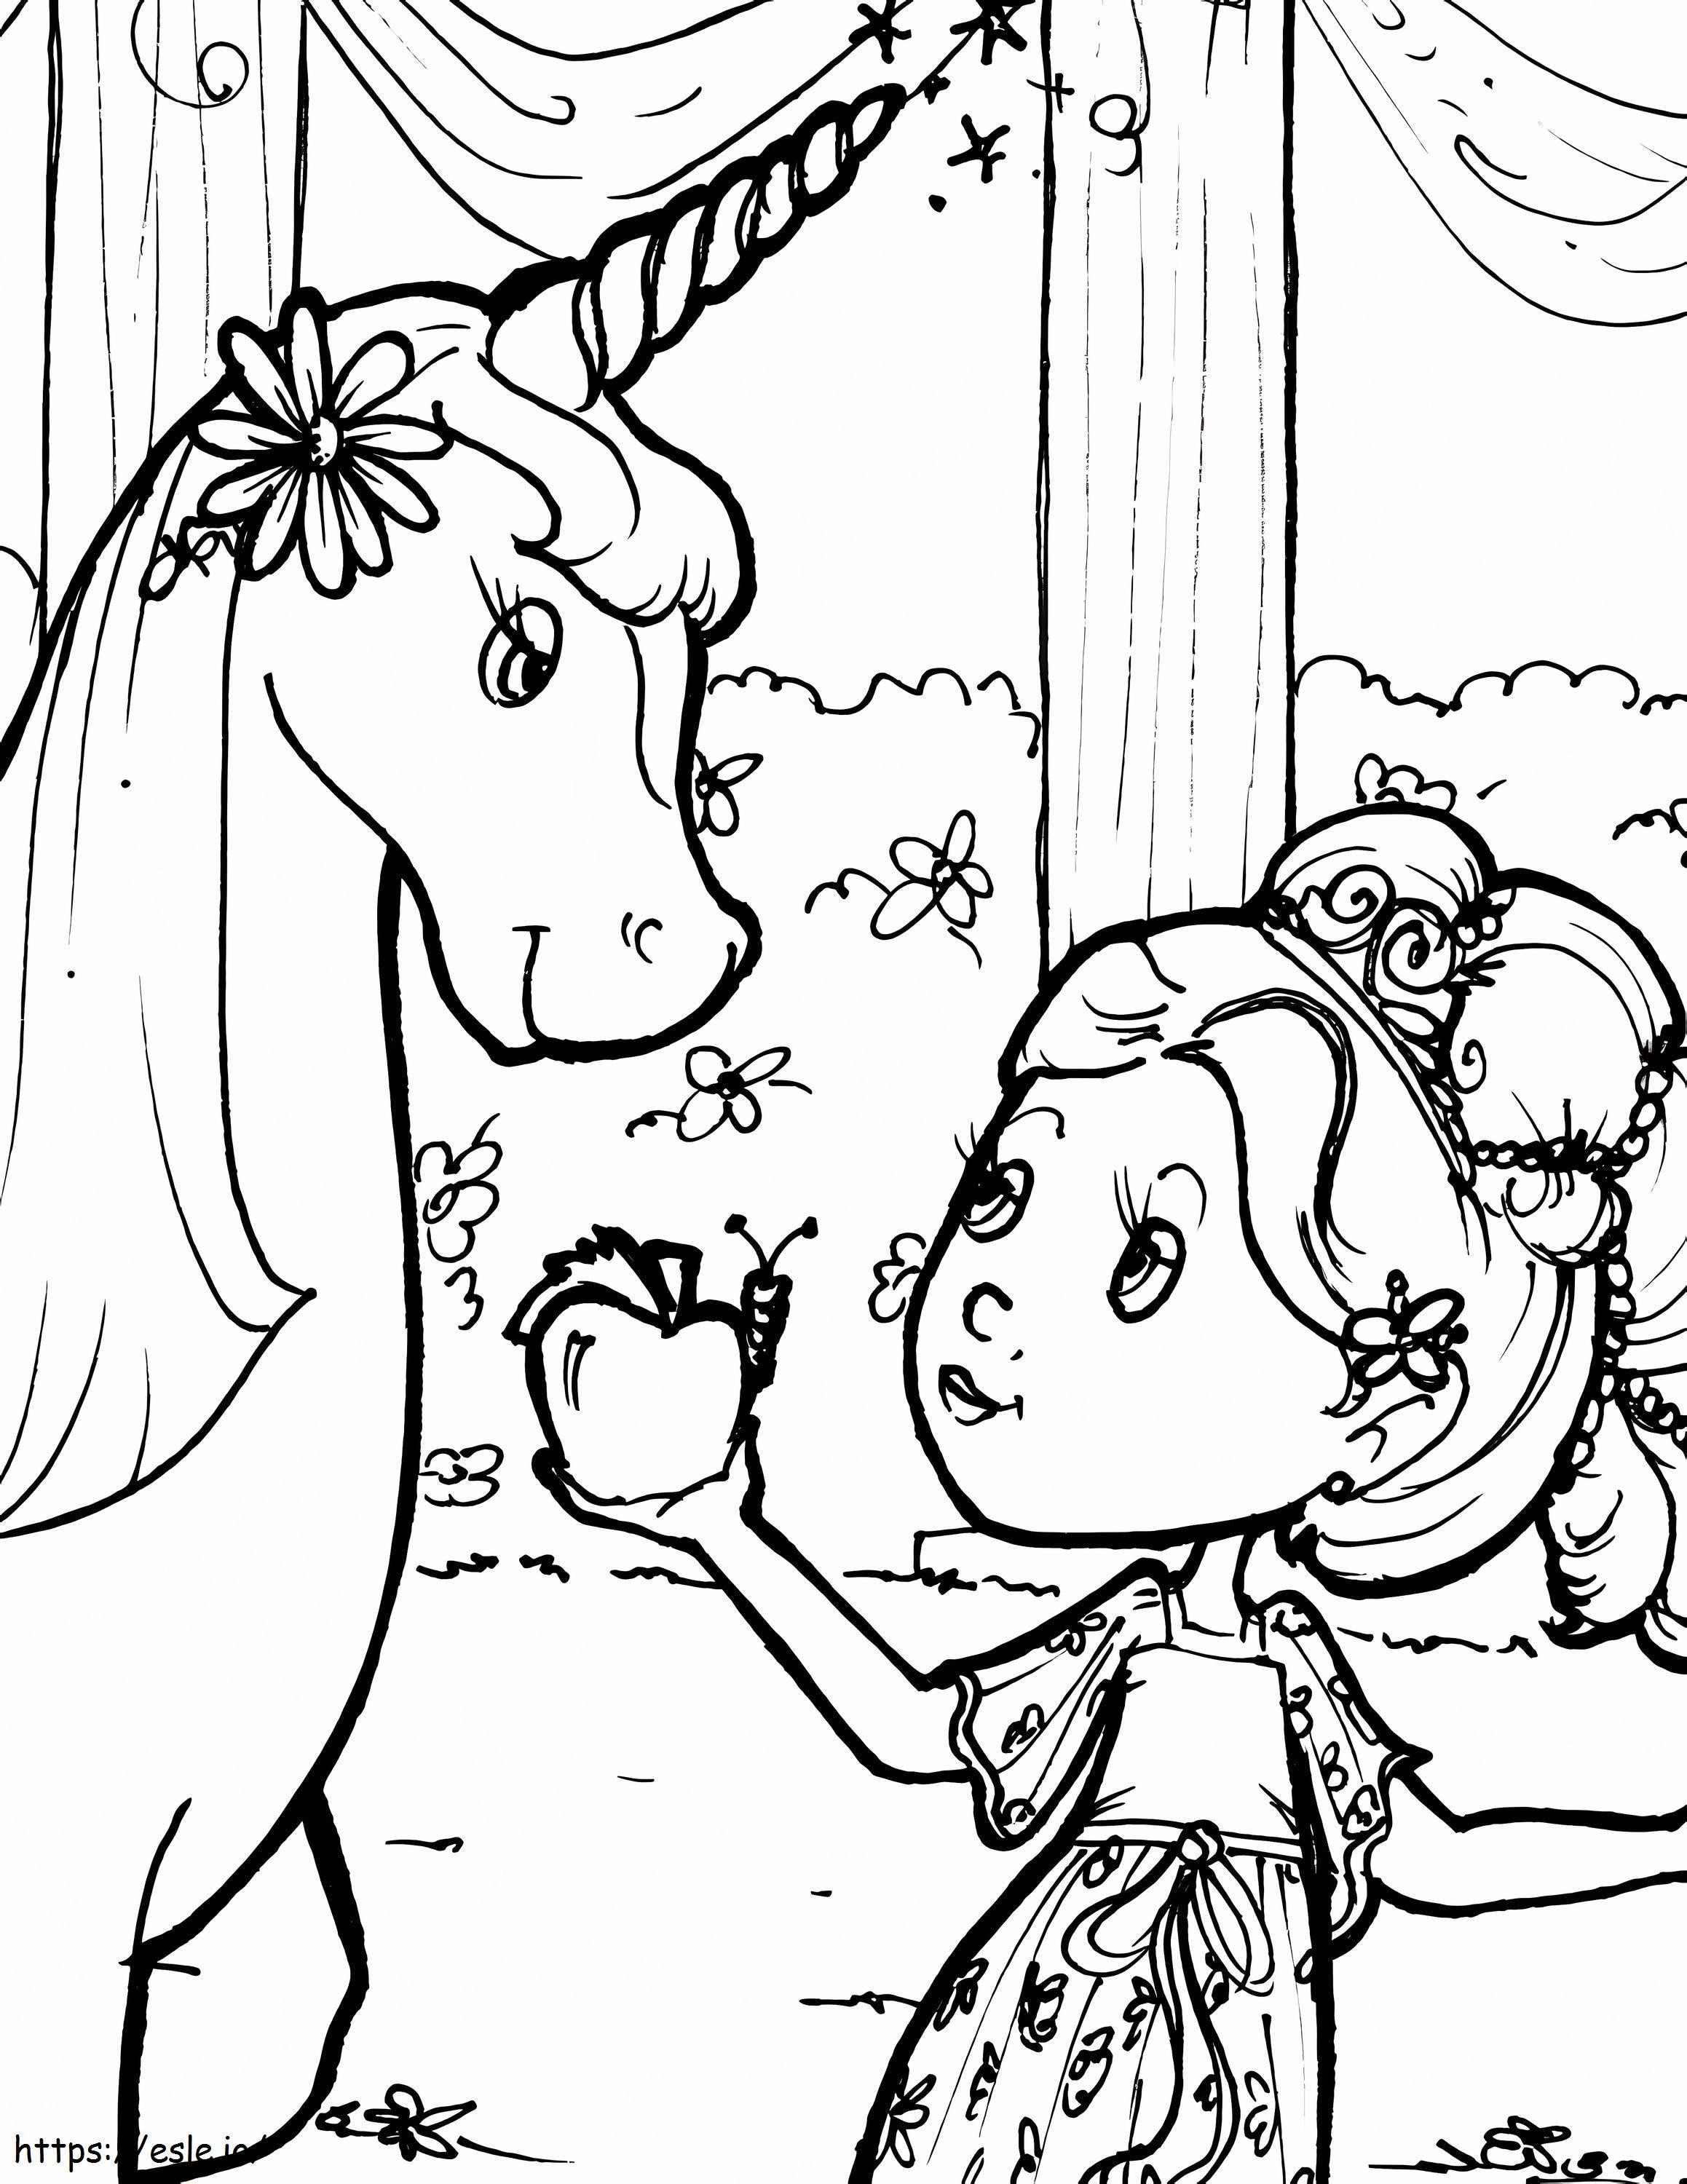 1563929440 Girl Giving Apple For Unicorn A4 coloring page